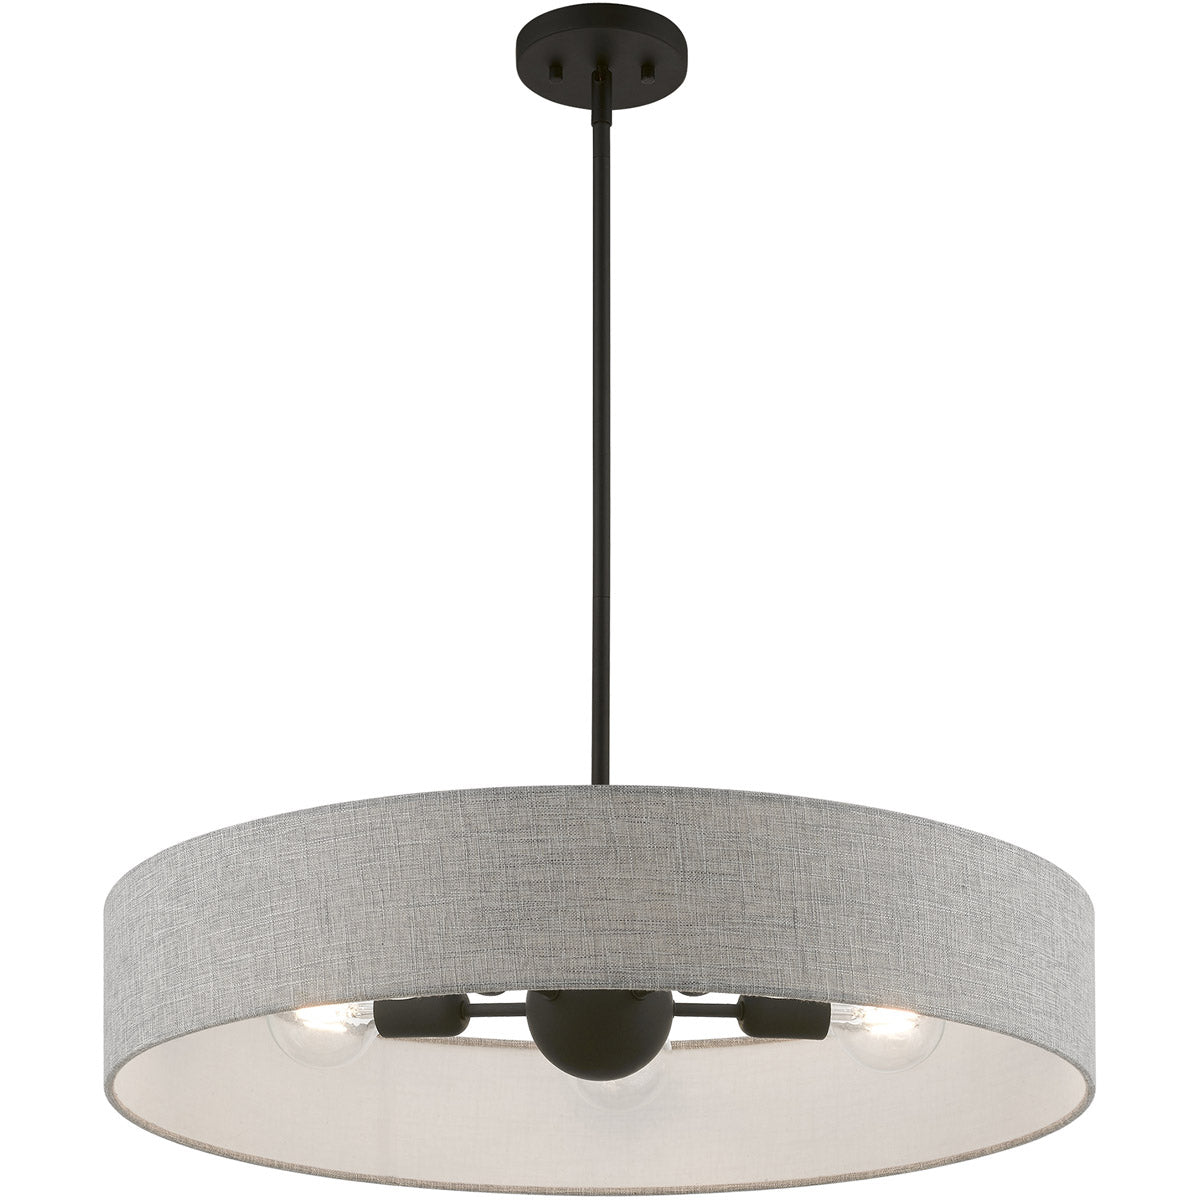 Elmhurst 5 Light 26 inch Pendant-Livex Lighting-LIVEX-46145-91-PendantsBrushed Nickel with Shiny White Accents-4-France and Son